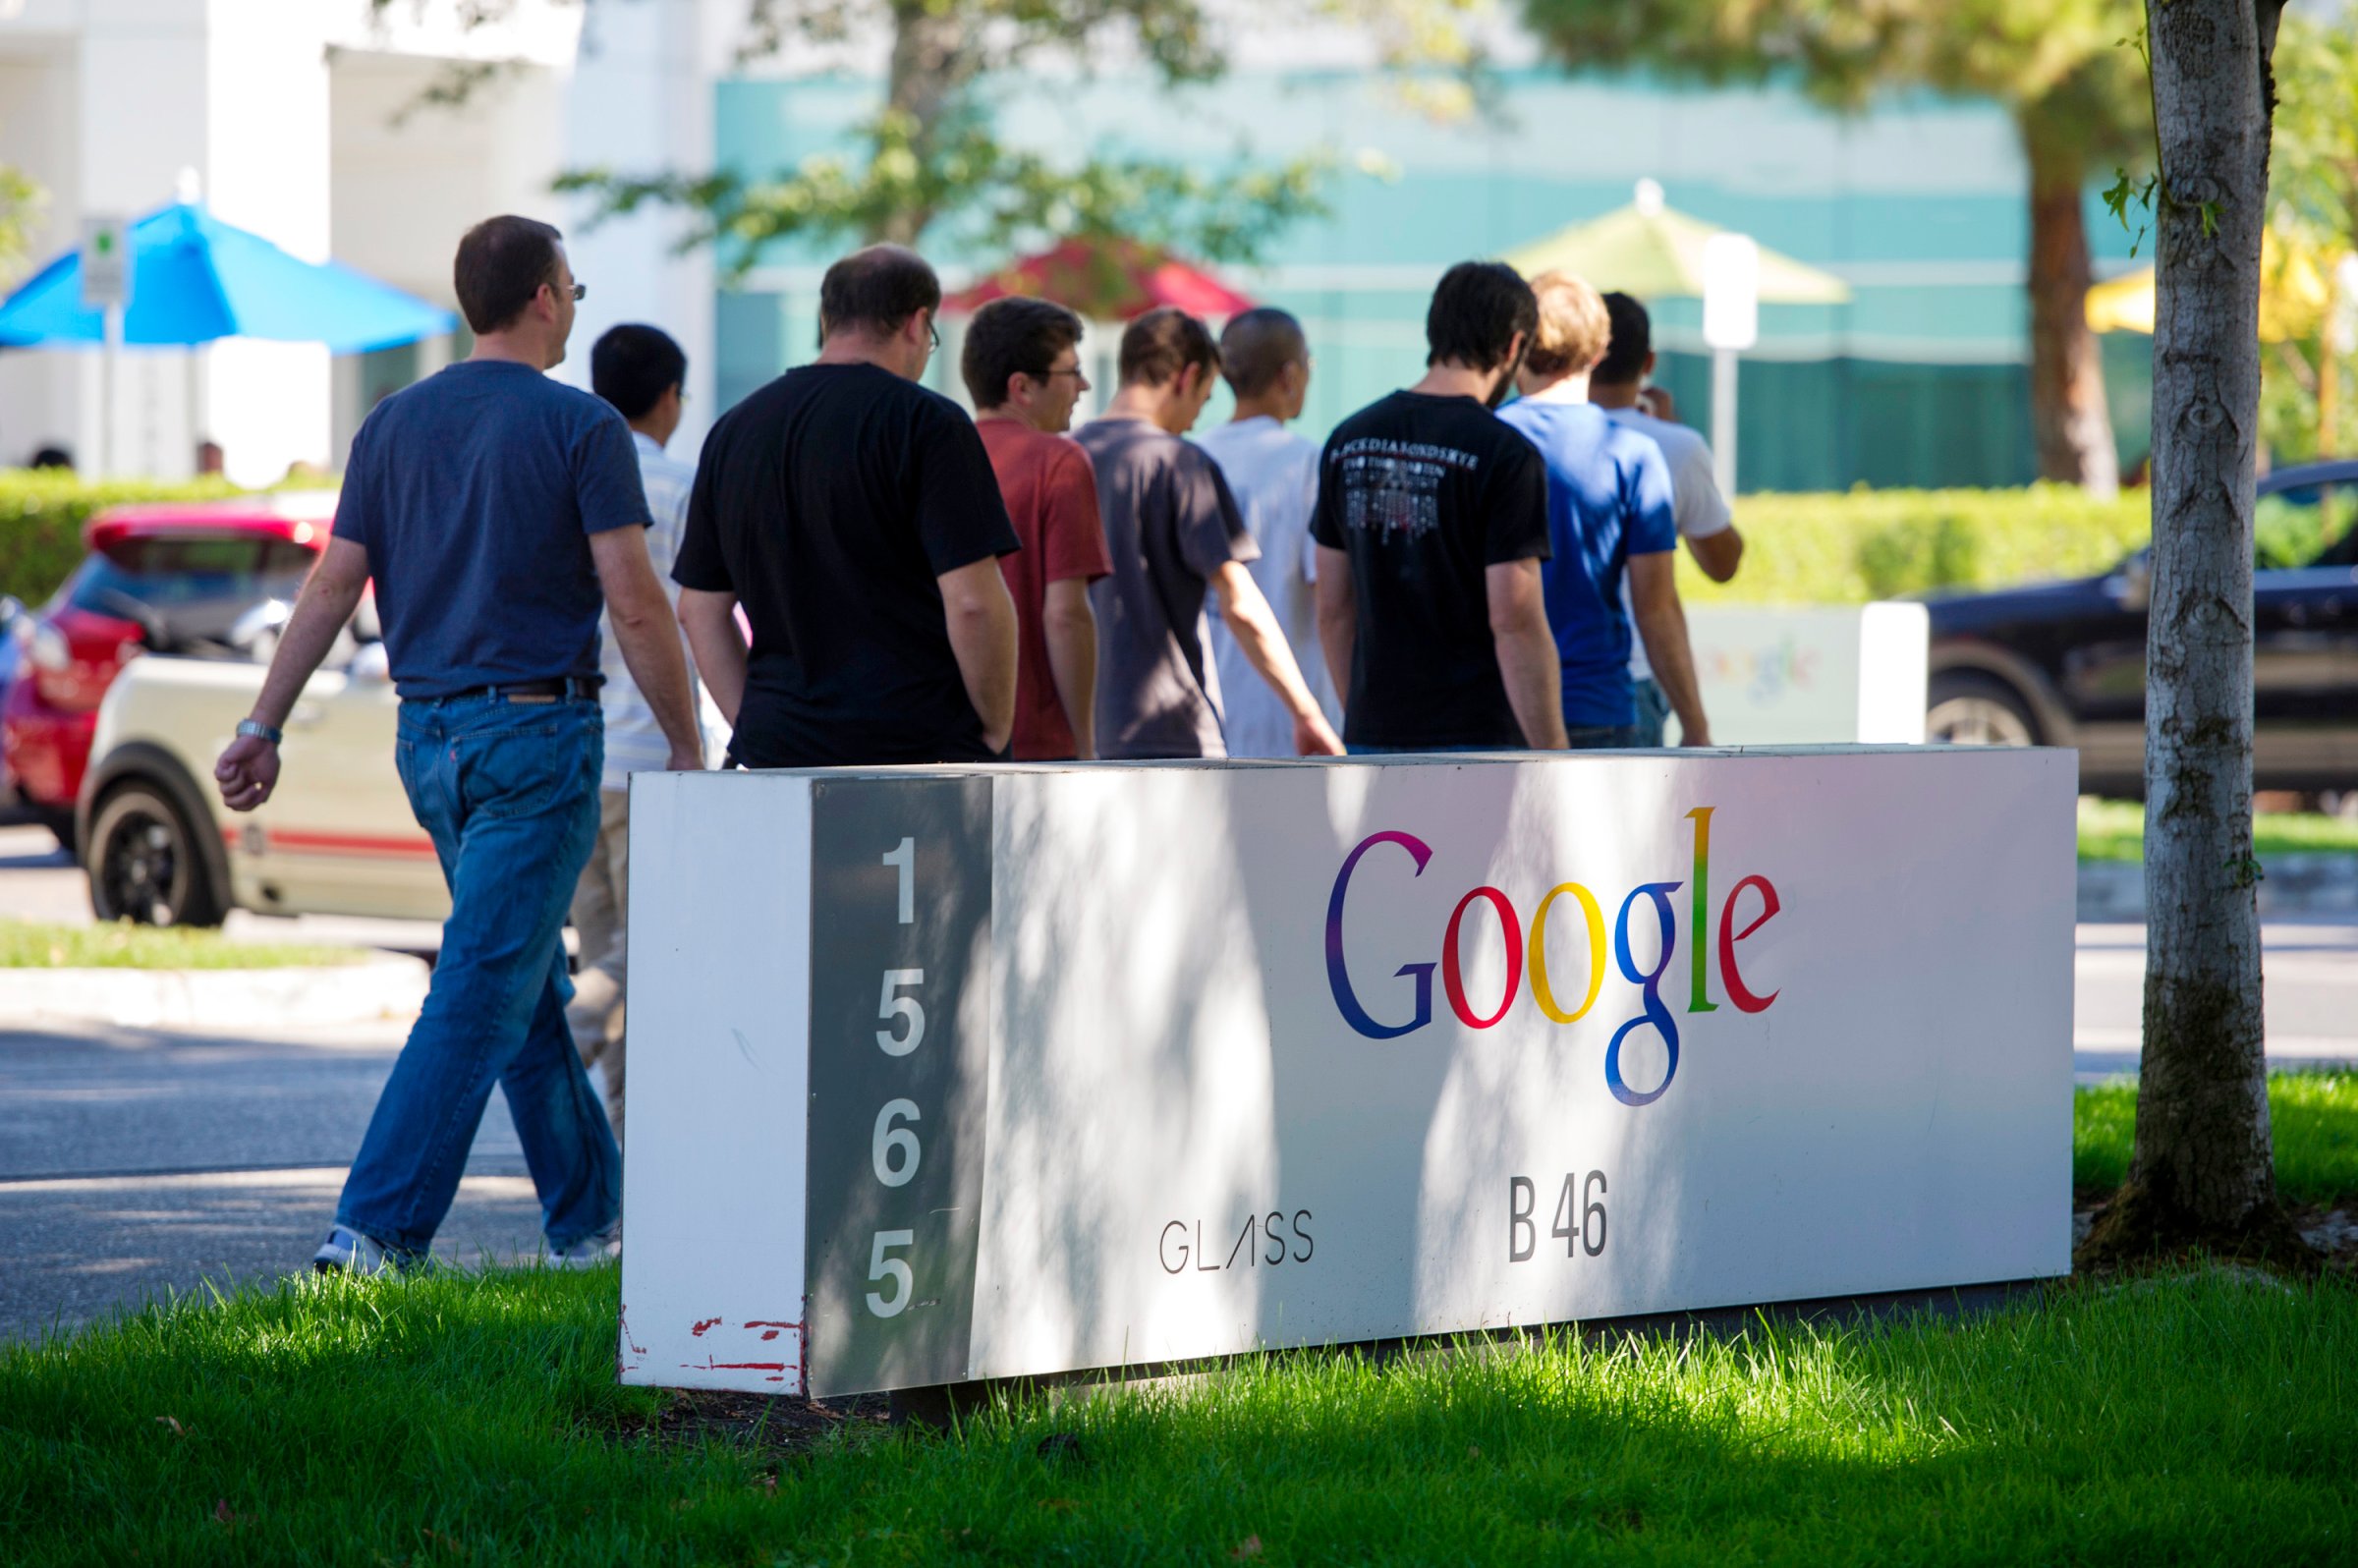 Pedestrians walk past Google Inc. signage displayed in front of the company's headquarters in Mountain View, Calif. on Sept. 27, 2013.